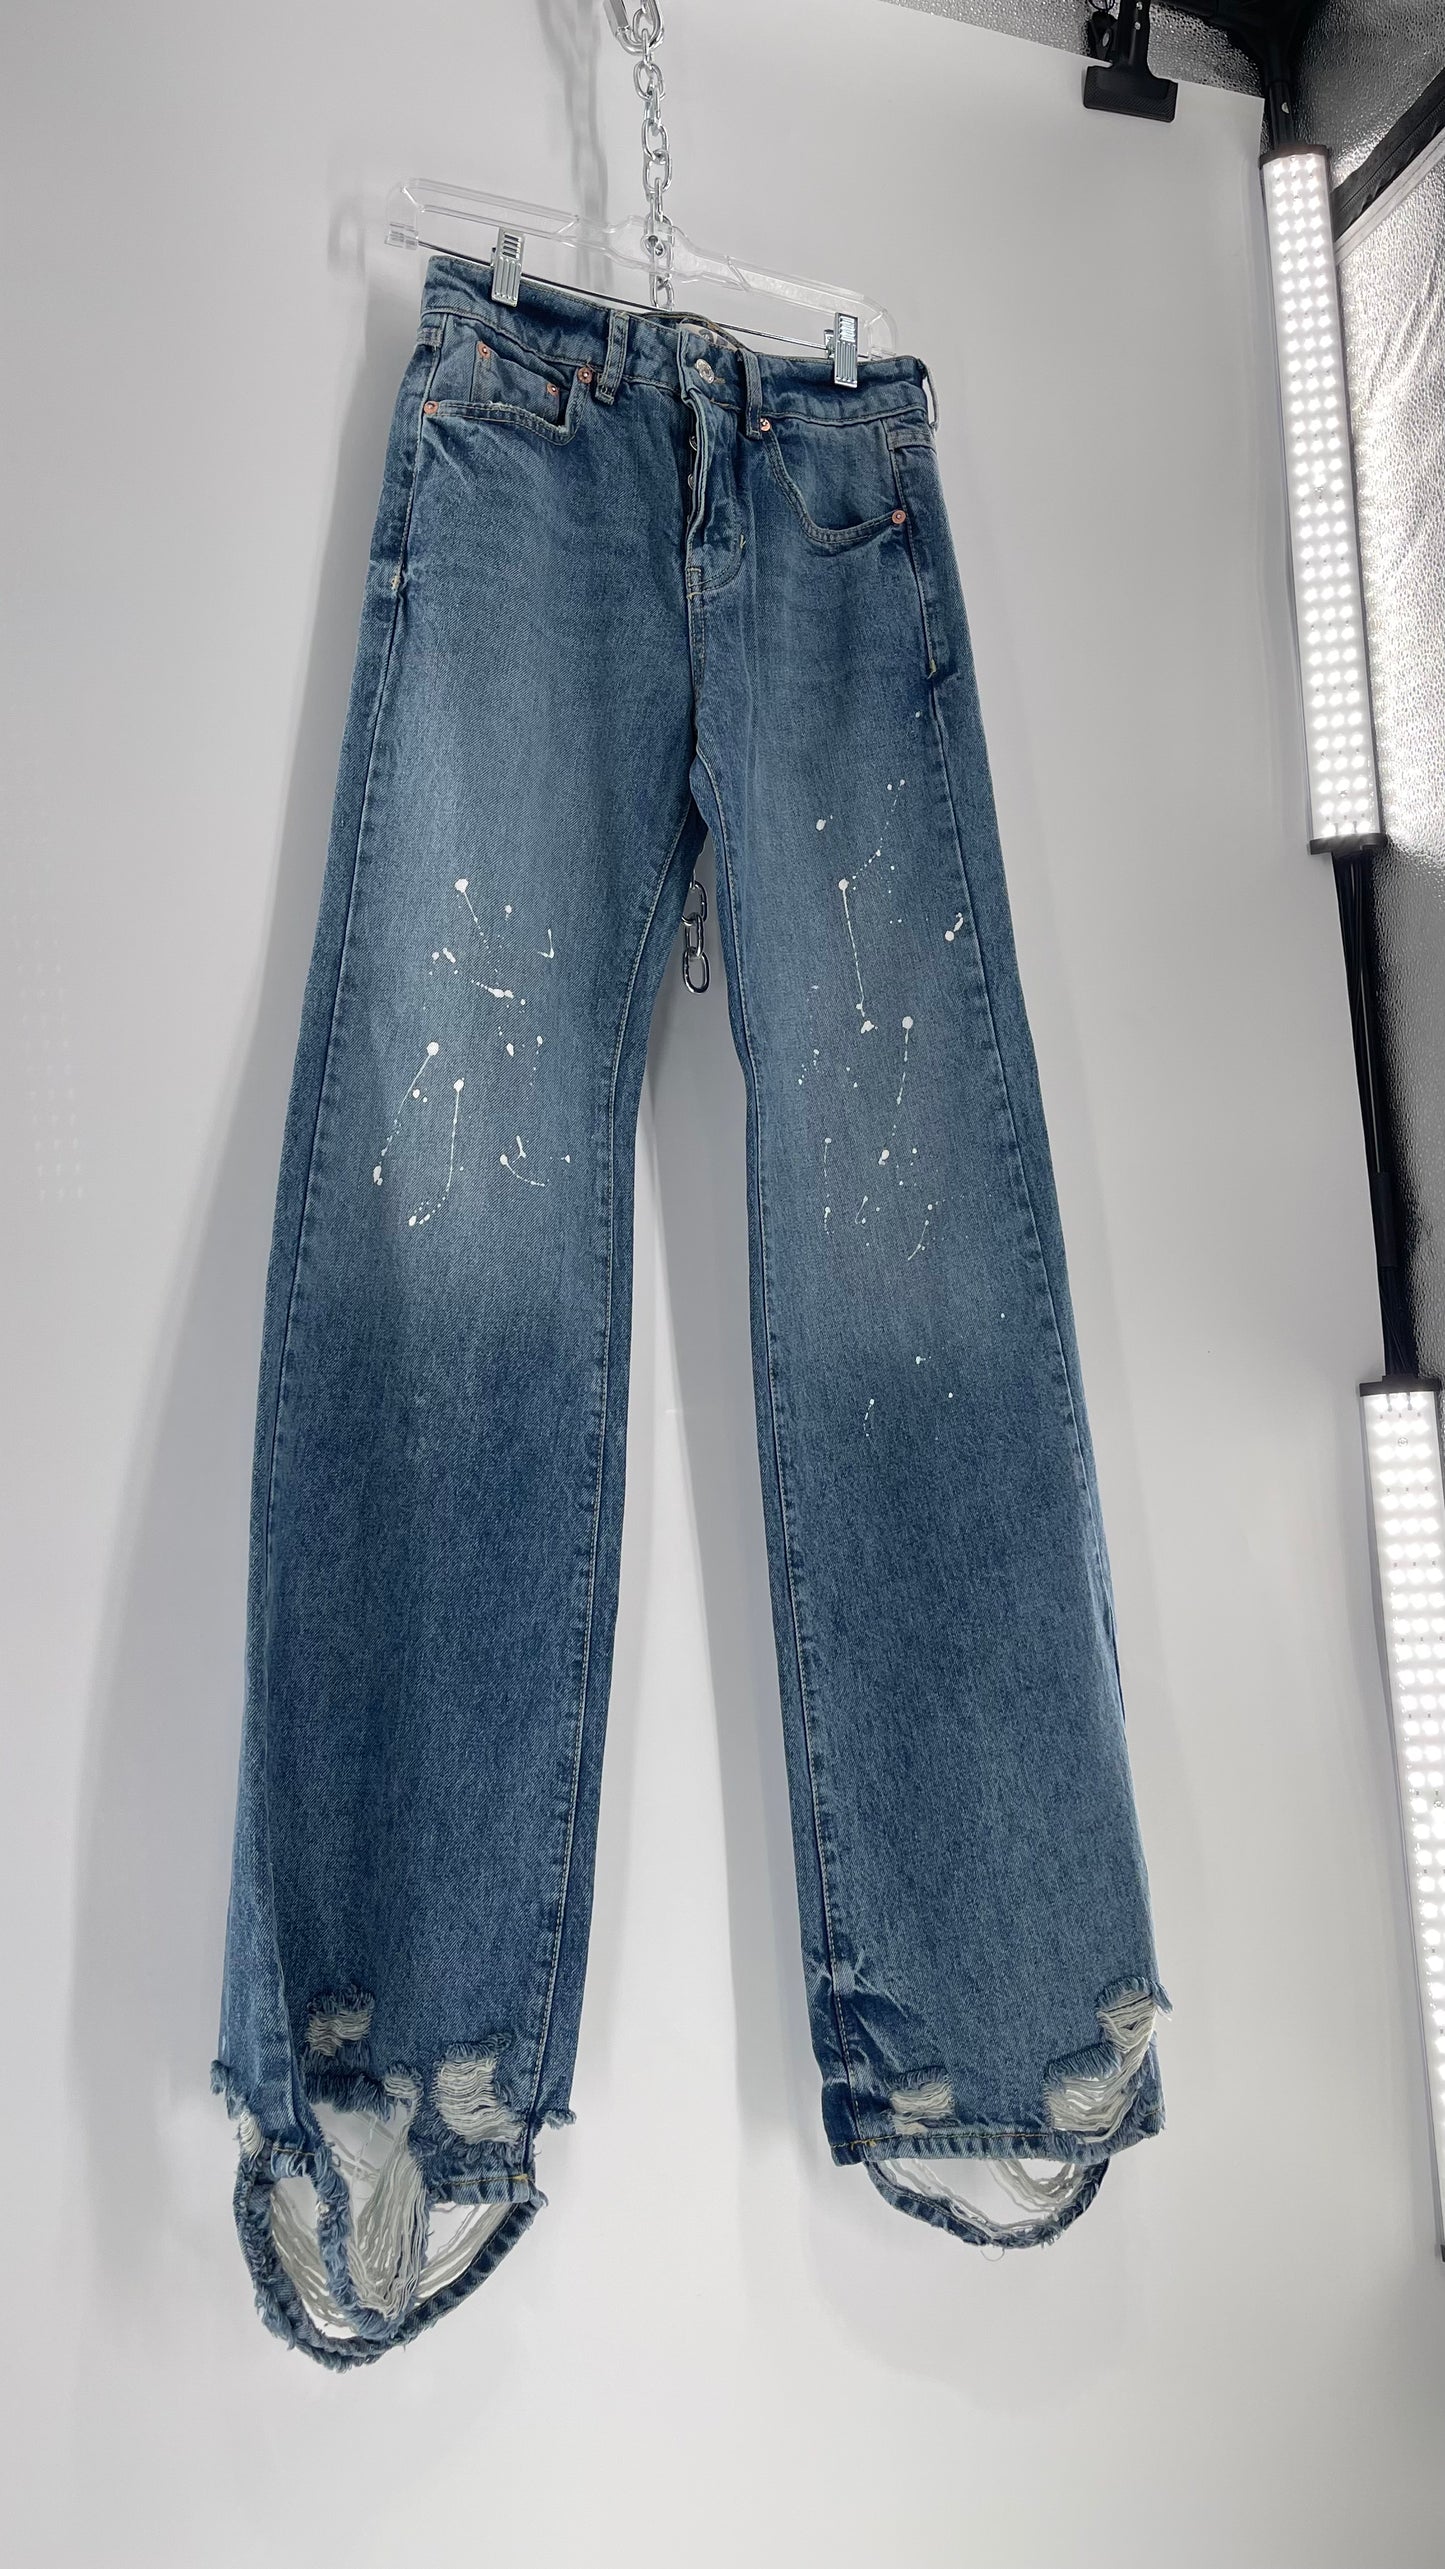 Free People Light Wash Straight Leg Jeans with Distressed Hem, Double Pockets and White Paint with Tags Attached (25)